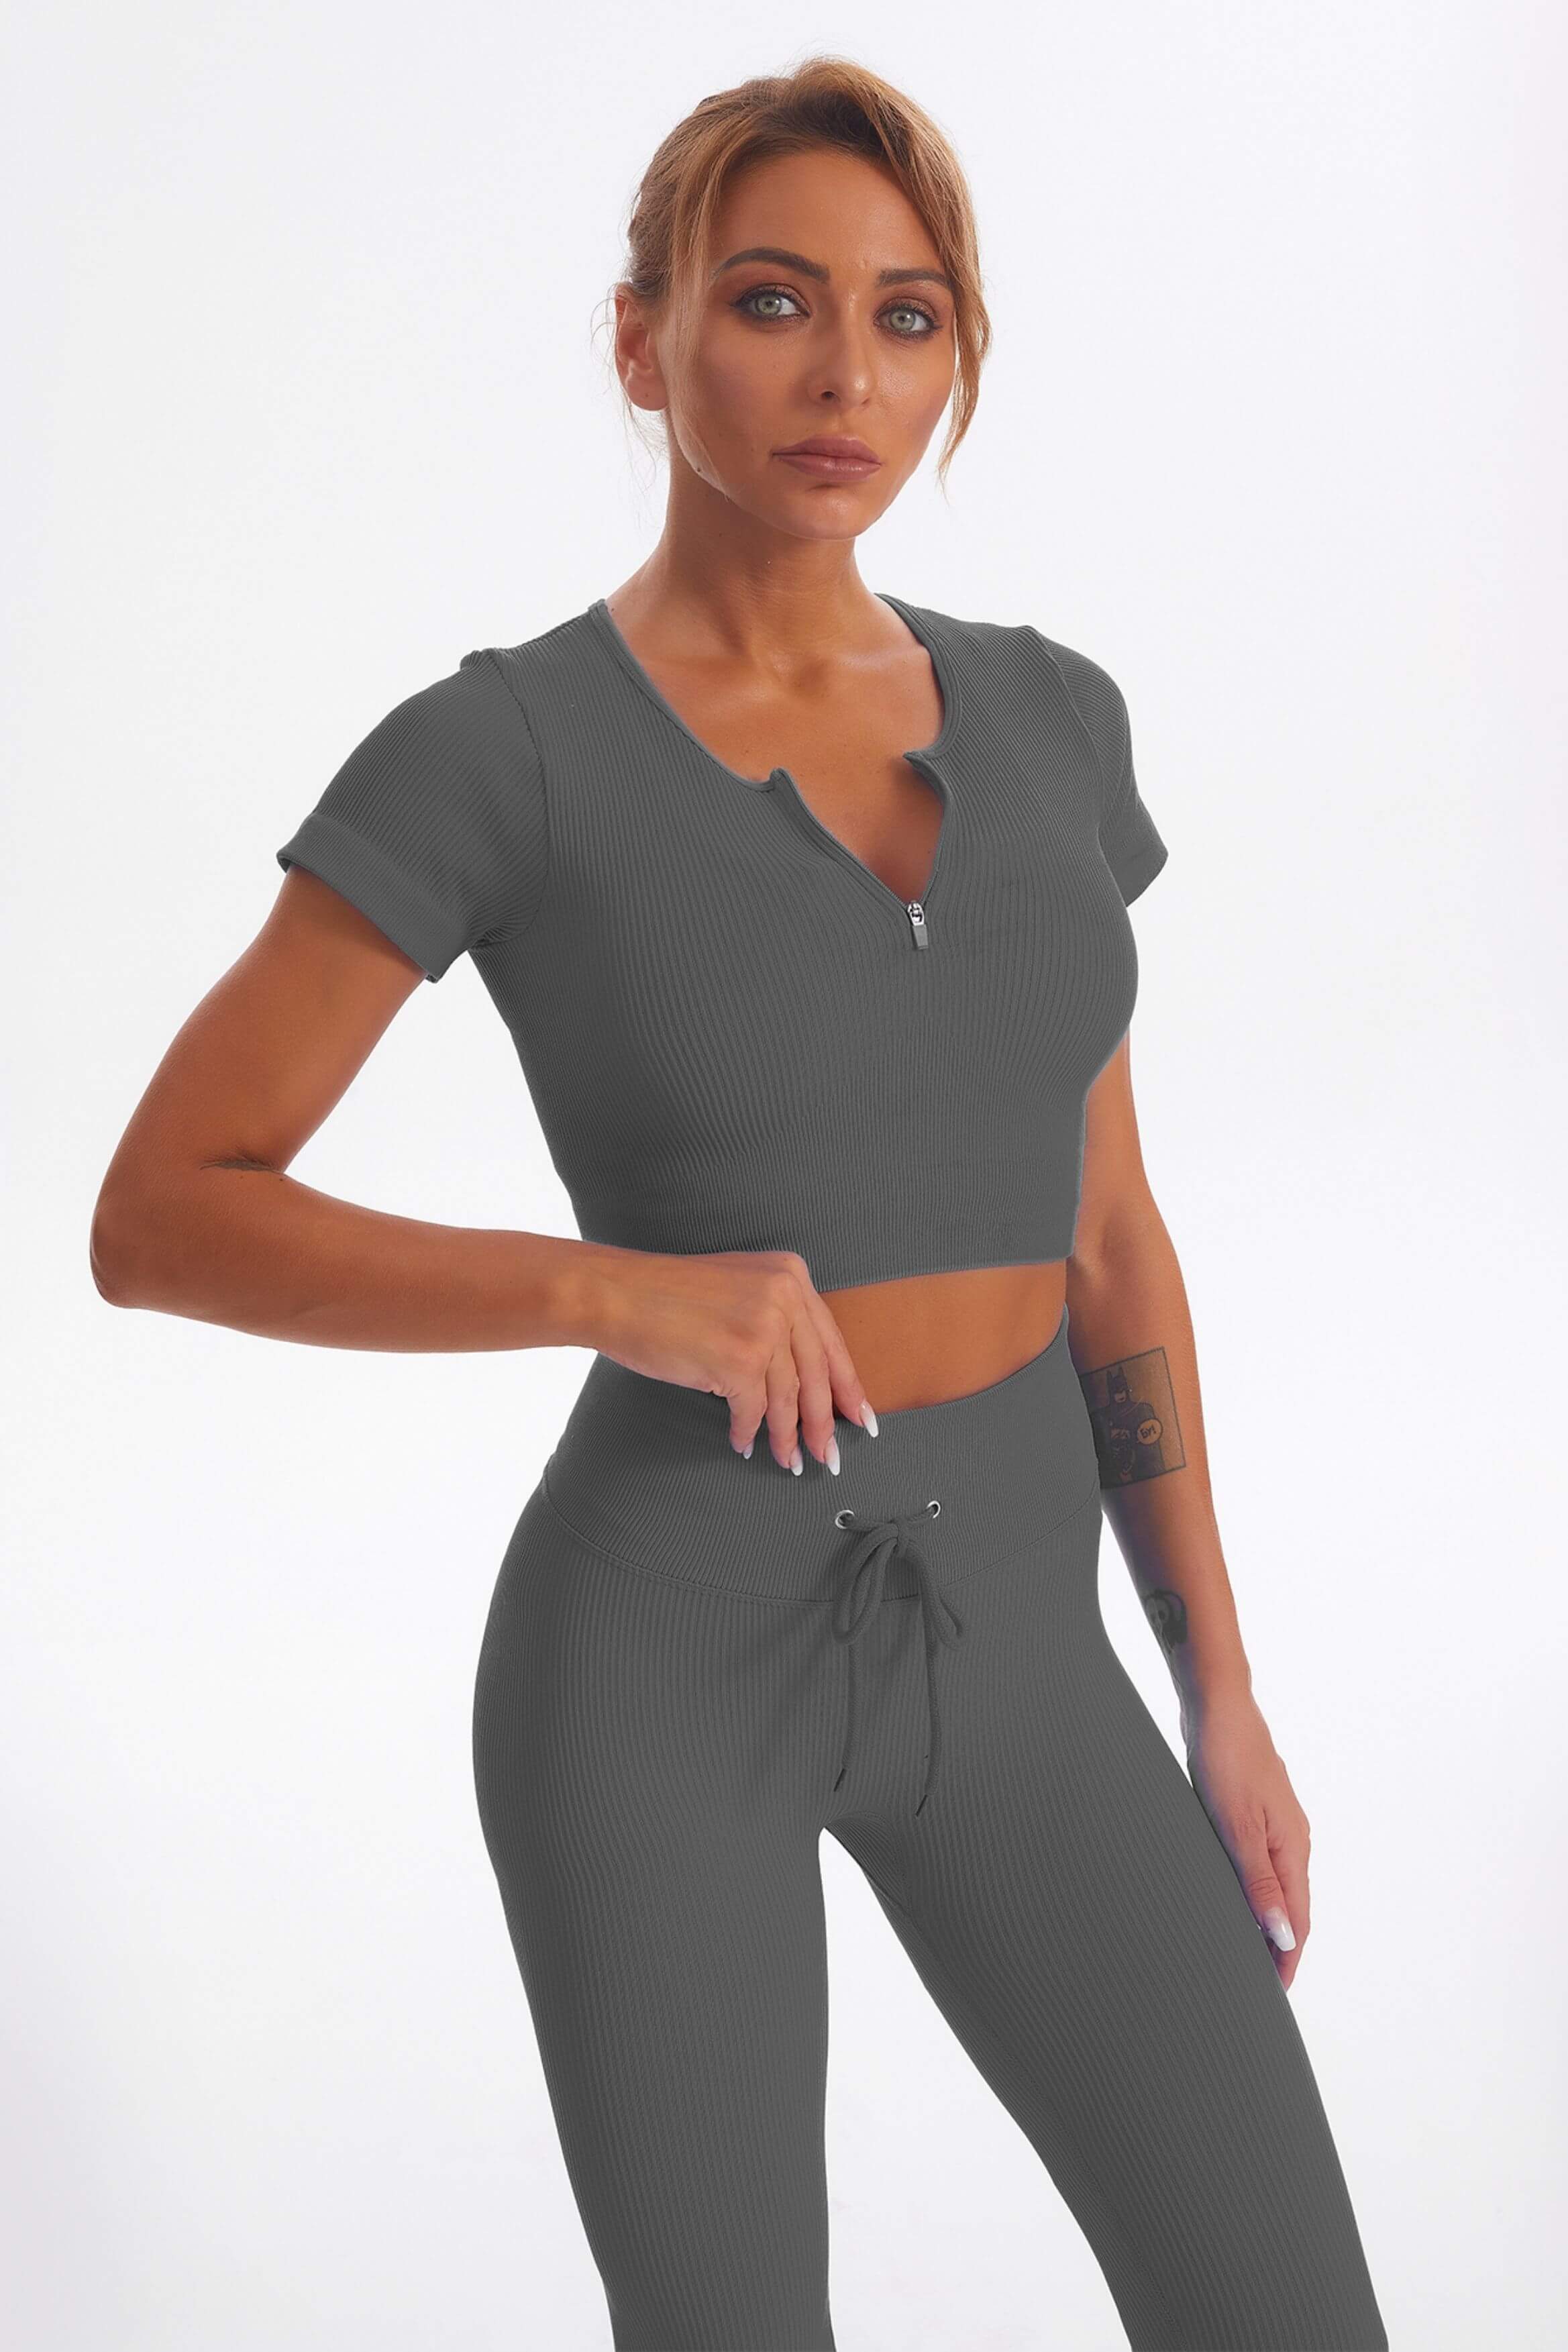  DADAB Workout Sets Two Piece Outfits for Women Clothes